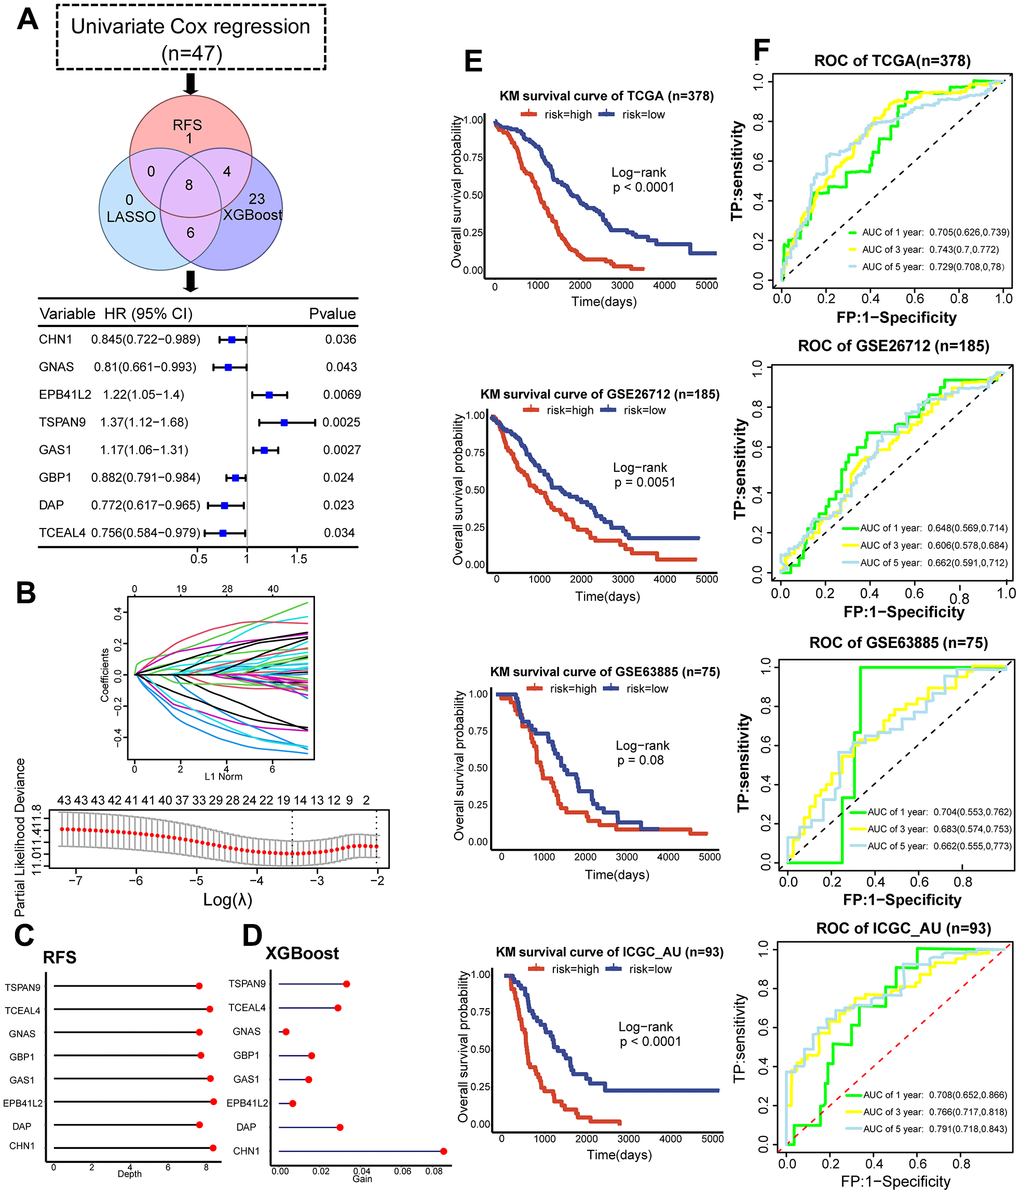 Development and validation of the dCAF-based prognostic signature. (A) Workflow for feature gene selection and HR values of the 8 feature genes with 95% CI. (B) Characteristics of coefficient changes of variables; selection of tuning parameter λ and the corresponding number of variables through cross-validation in LASSO model. (C) Depths of feature genes calculated by the RSF model. (D) Gain values of feature genes calculated by the XGBoost model. (E) KM survival analysis was performed in the low- and high-risk groups categorized by the median risk score in the training set (TCGA) and validation sets (GSE63885, GSE26712, ICGC